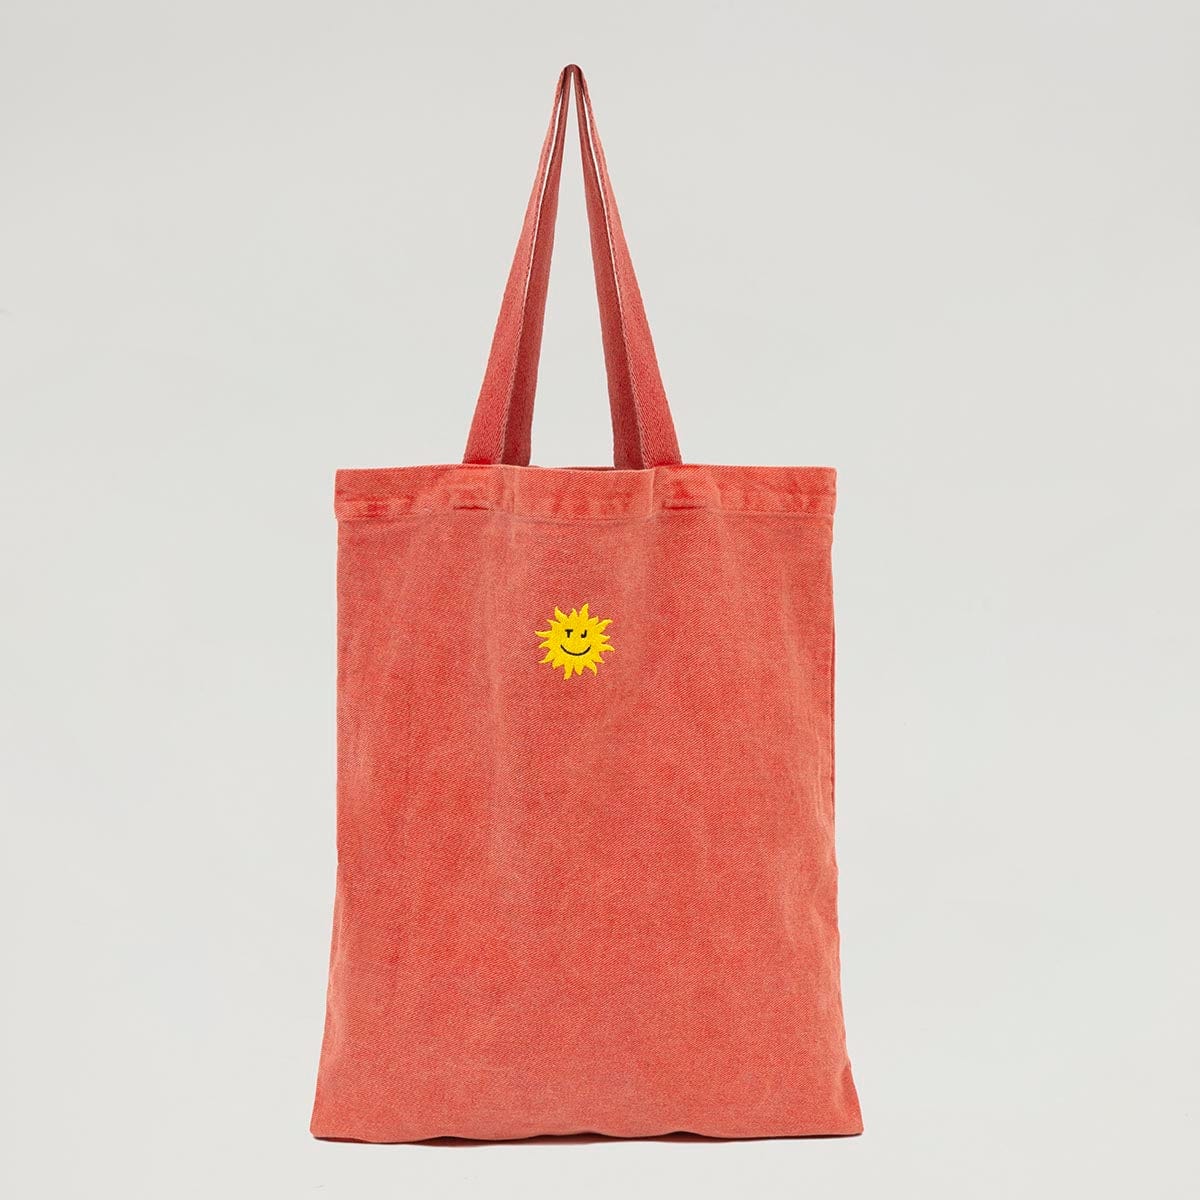 Twojeys bags RED SUNSET TOTE BAG